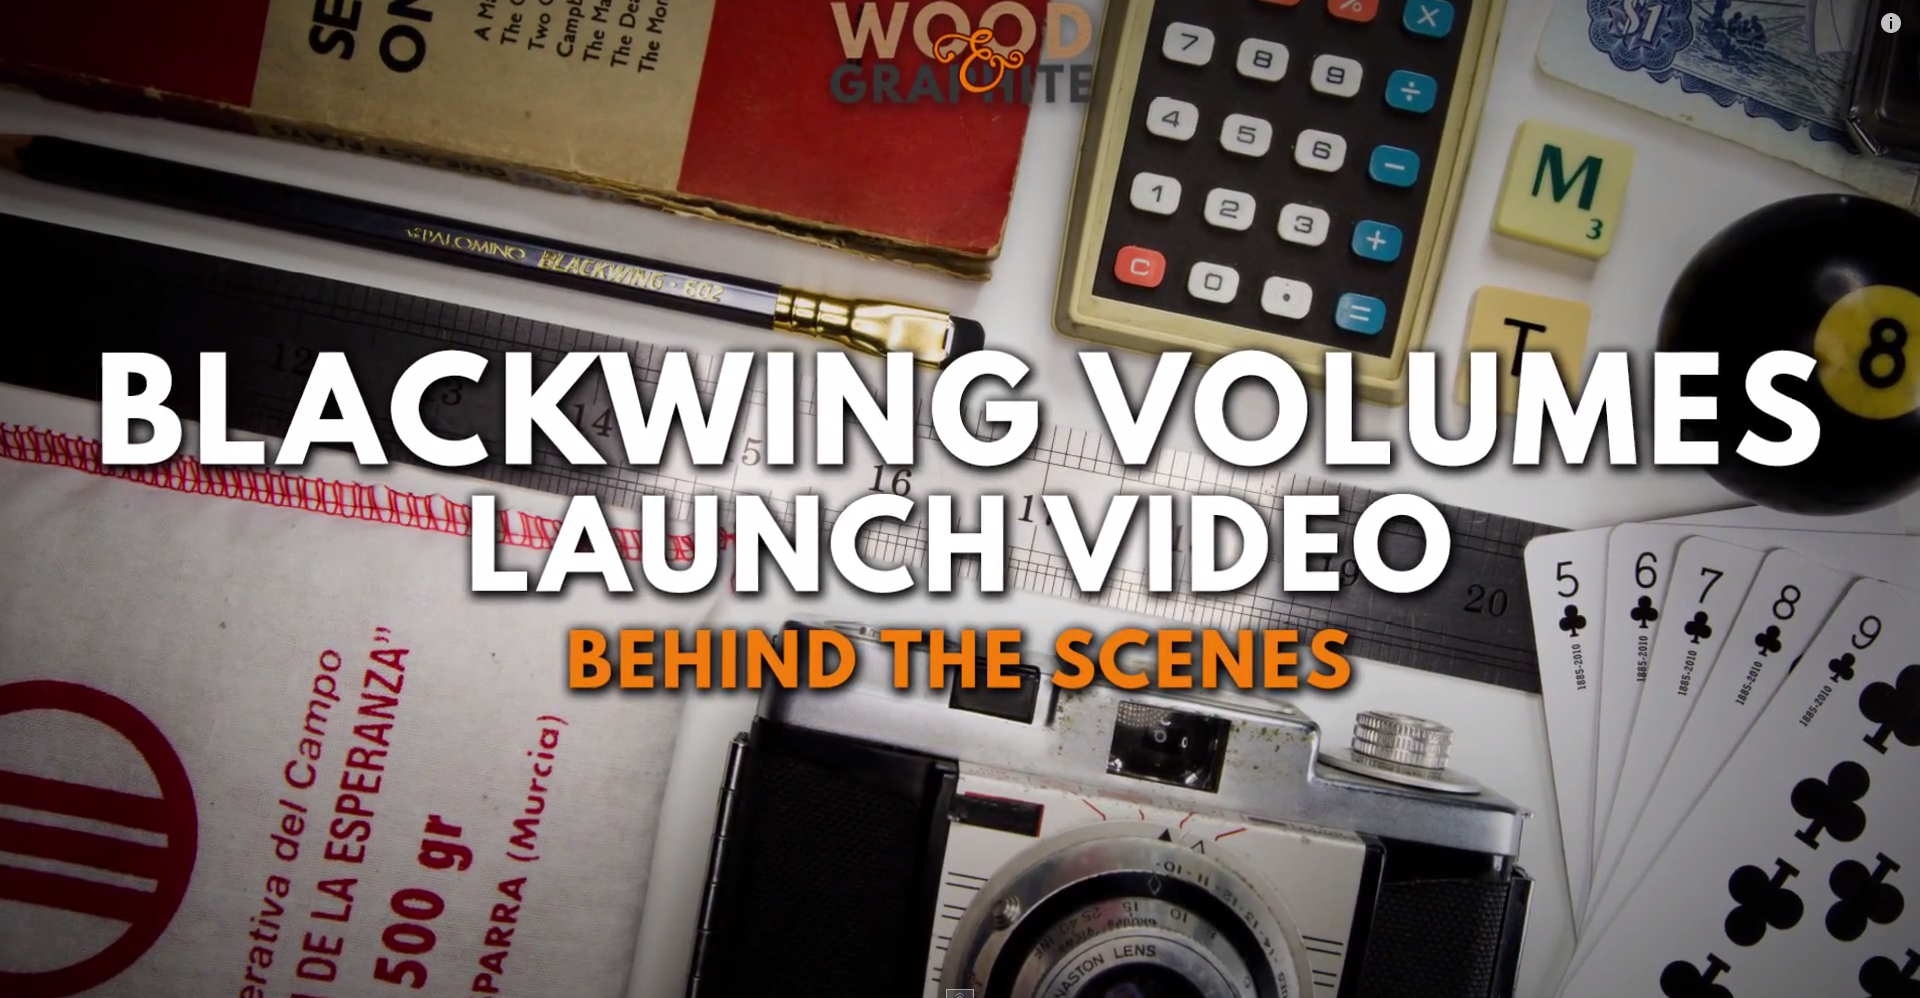 The Making of the Blackwing Volumes Launch Film